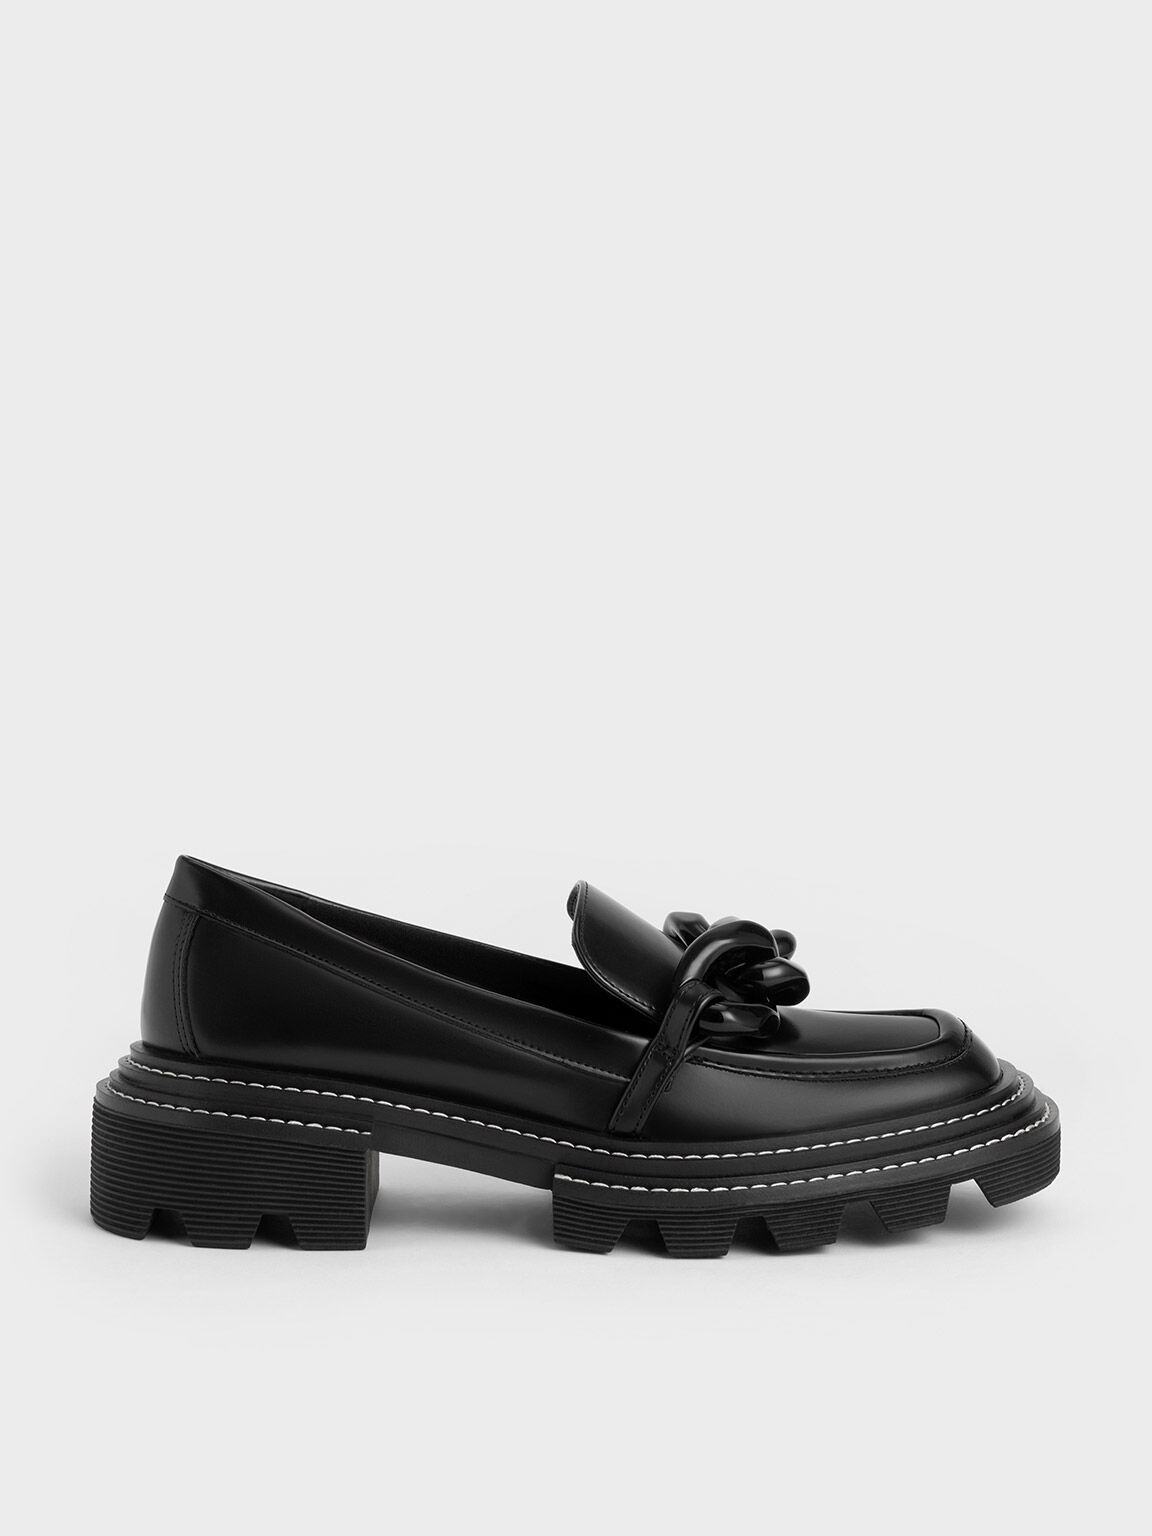 Perline Chunky Chain Loafers, Black, hi-res